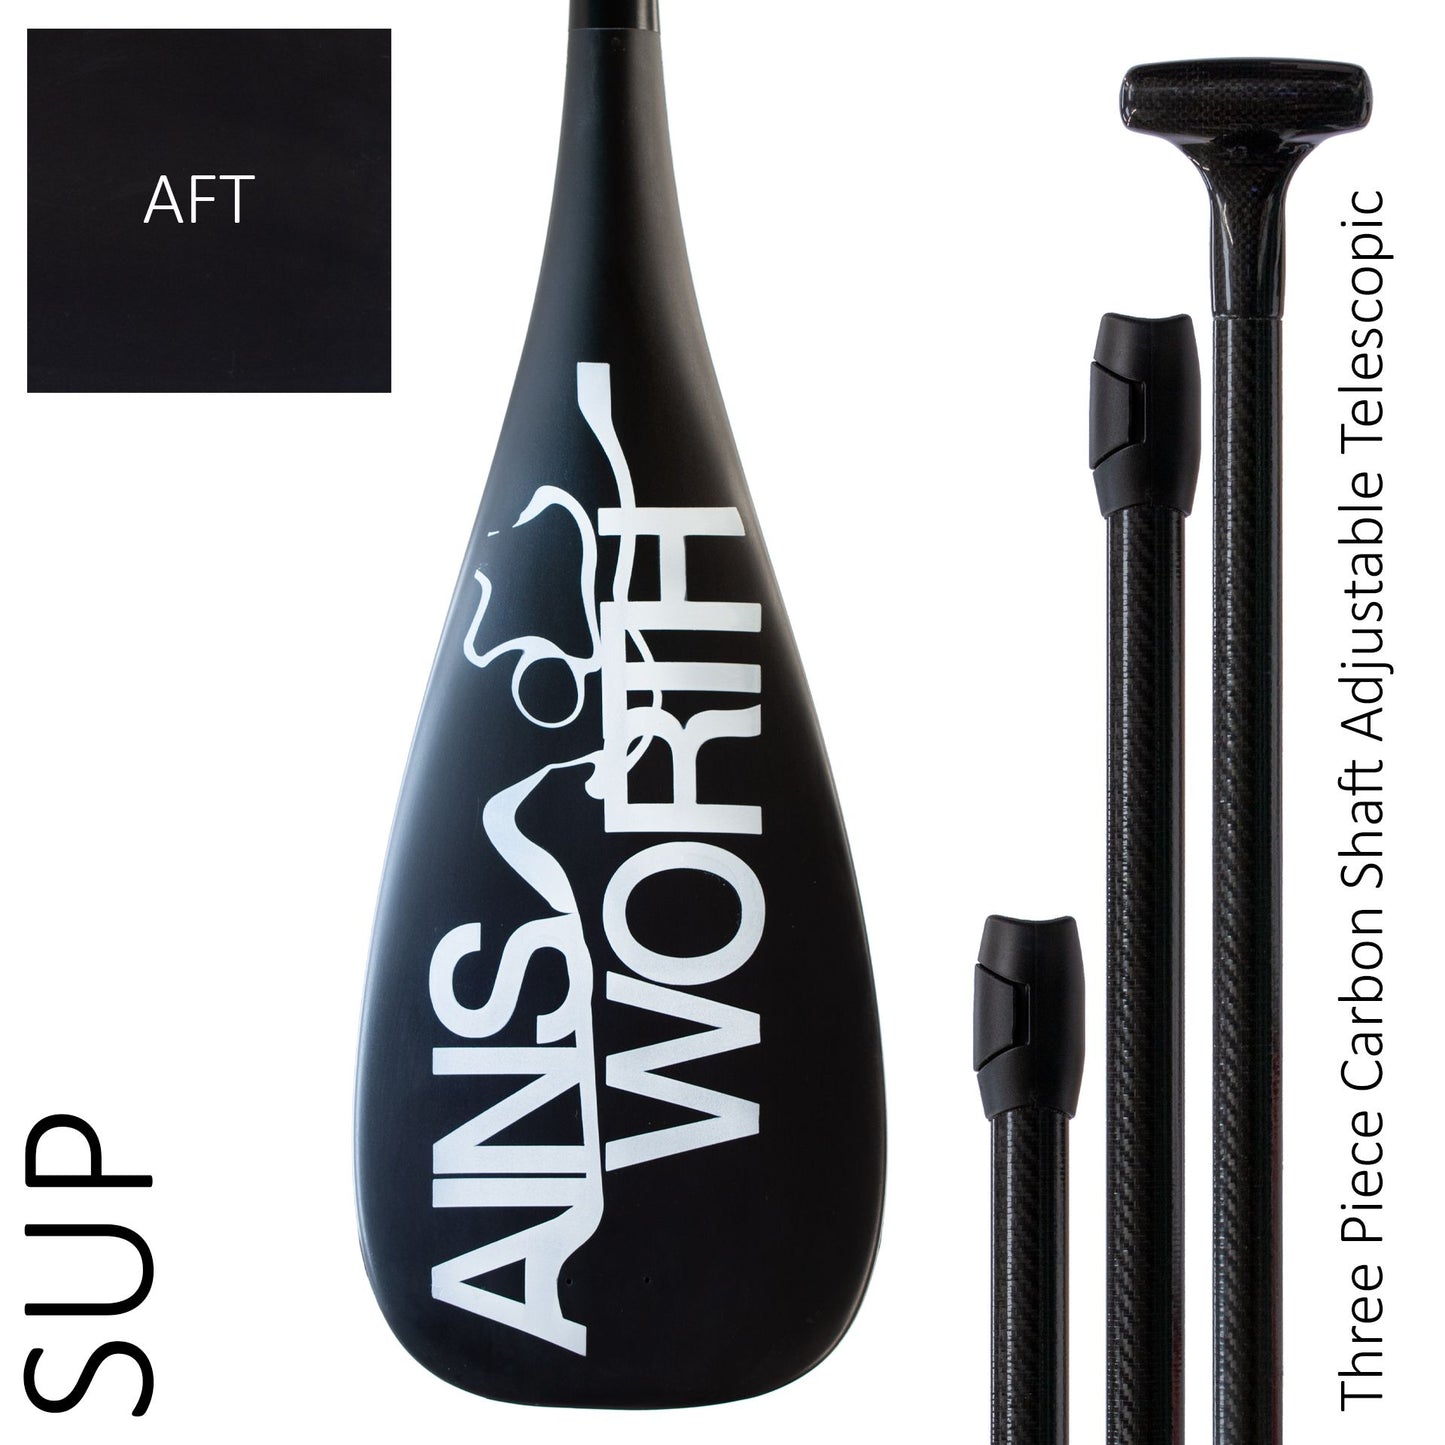 Ainsworth SUP Paddle (AFT) Three Piece Carbon Telescopic